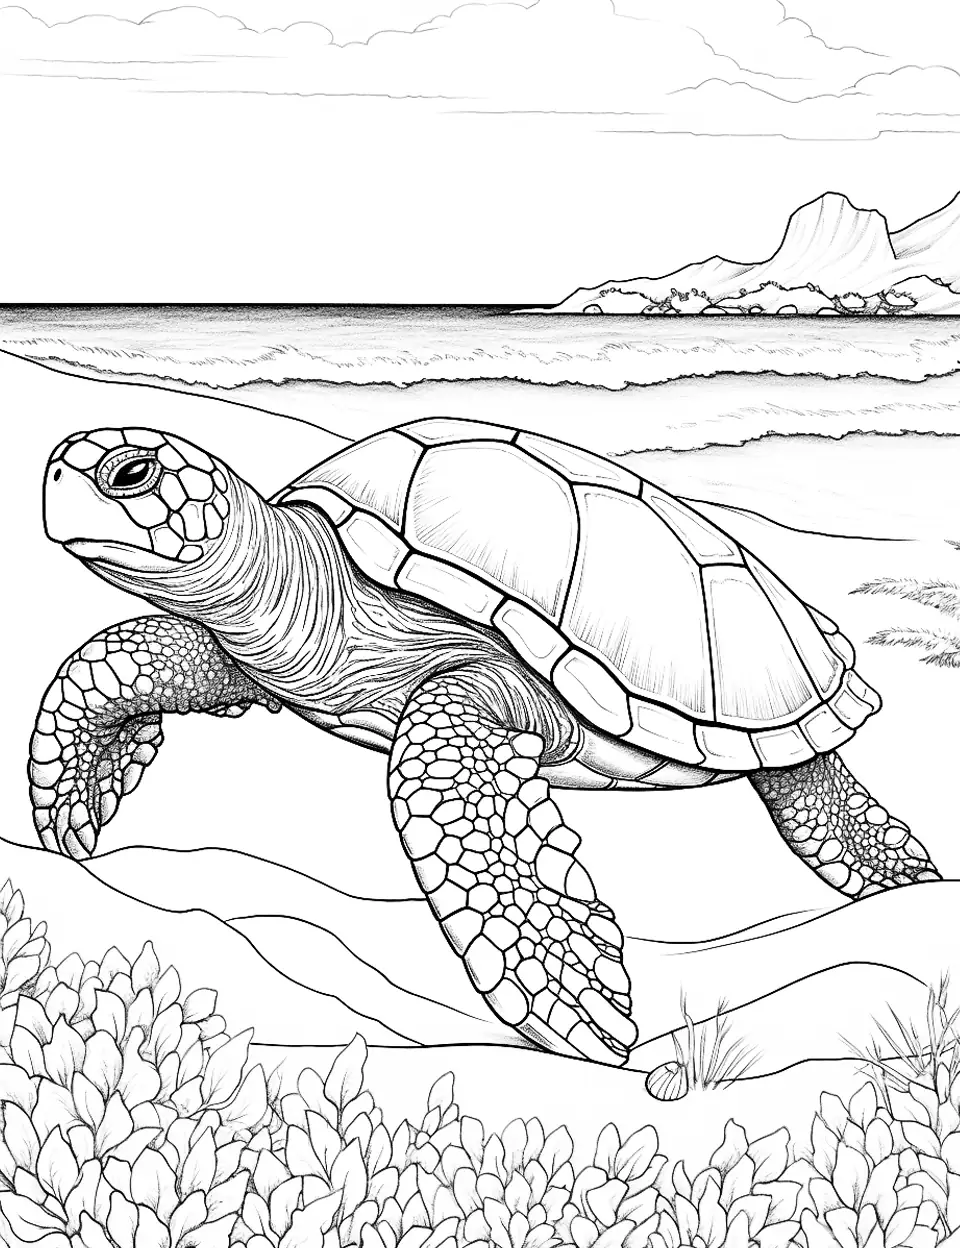 Turtle's Timeless Journey Adult Coloring Page - A turtle taking its time across a sandy beach.